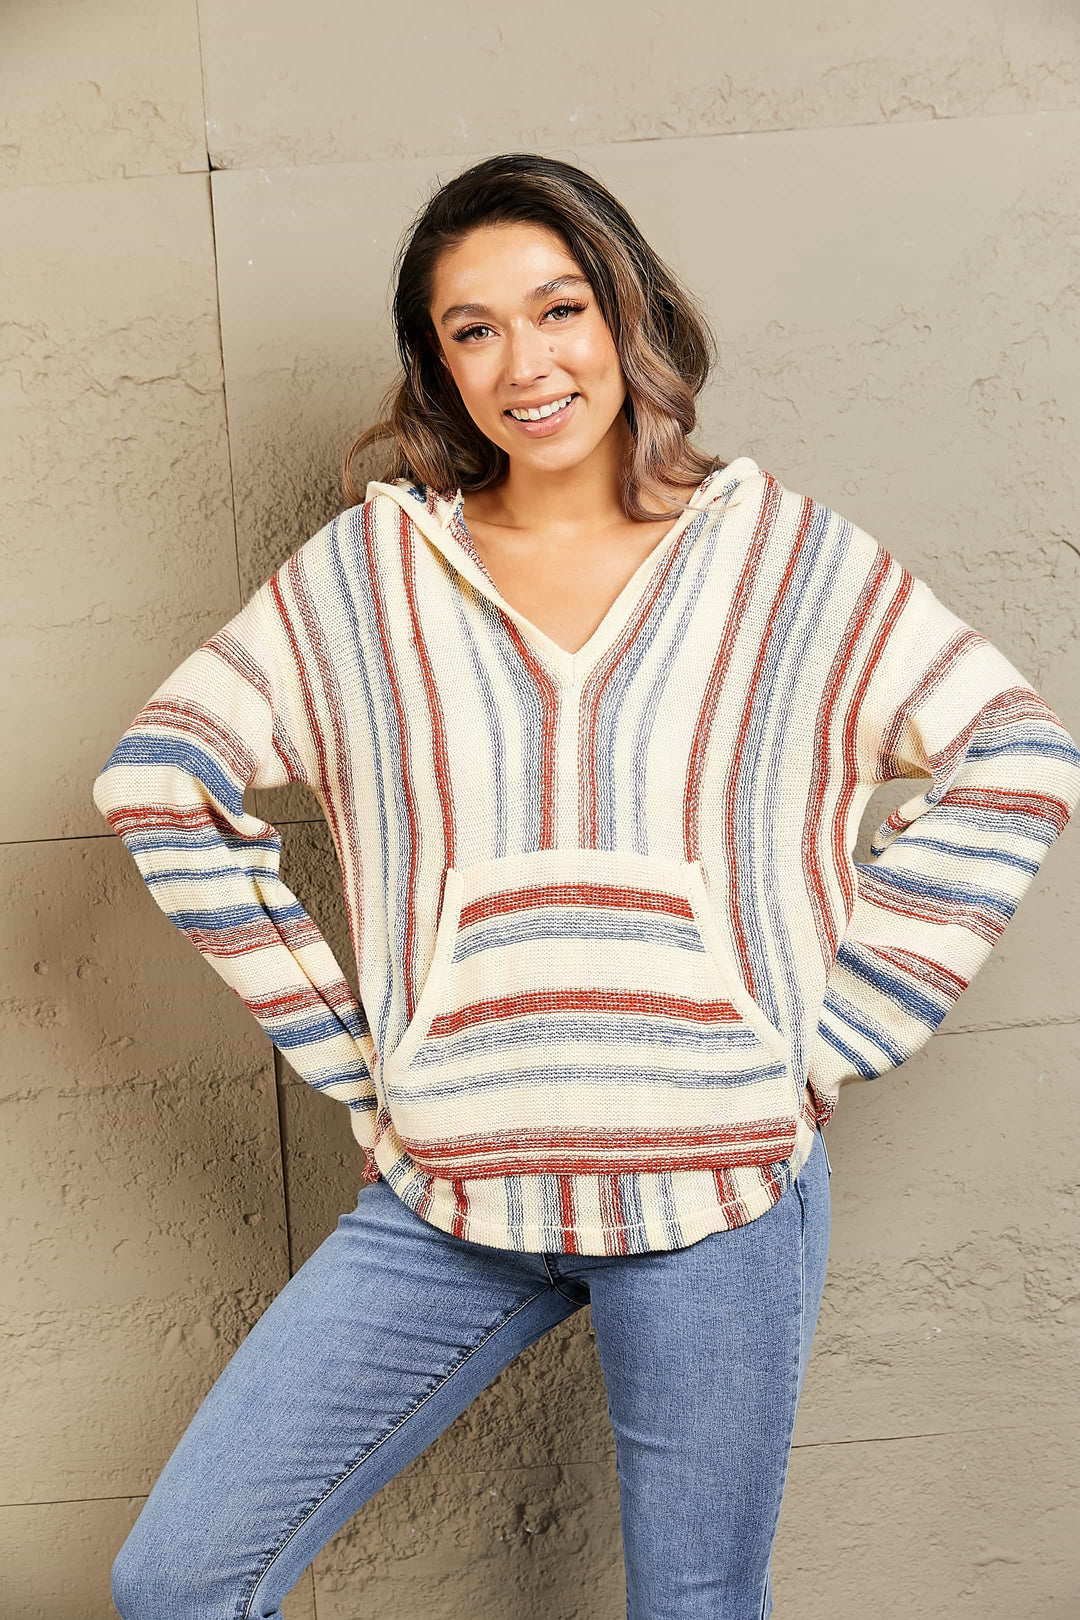 Striped Hooded Sweater with Kangaroo Pocket - sweater - Wild Willows Boutique - Massapequa, NY, affordable and fashionable clothing for women of all ages. Bottoms, tops, dresses, intimates, outerwear, sweater, shoes, accessories, jewelry, active wear, and more // Wild Willow Boutique.